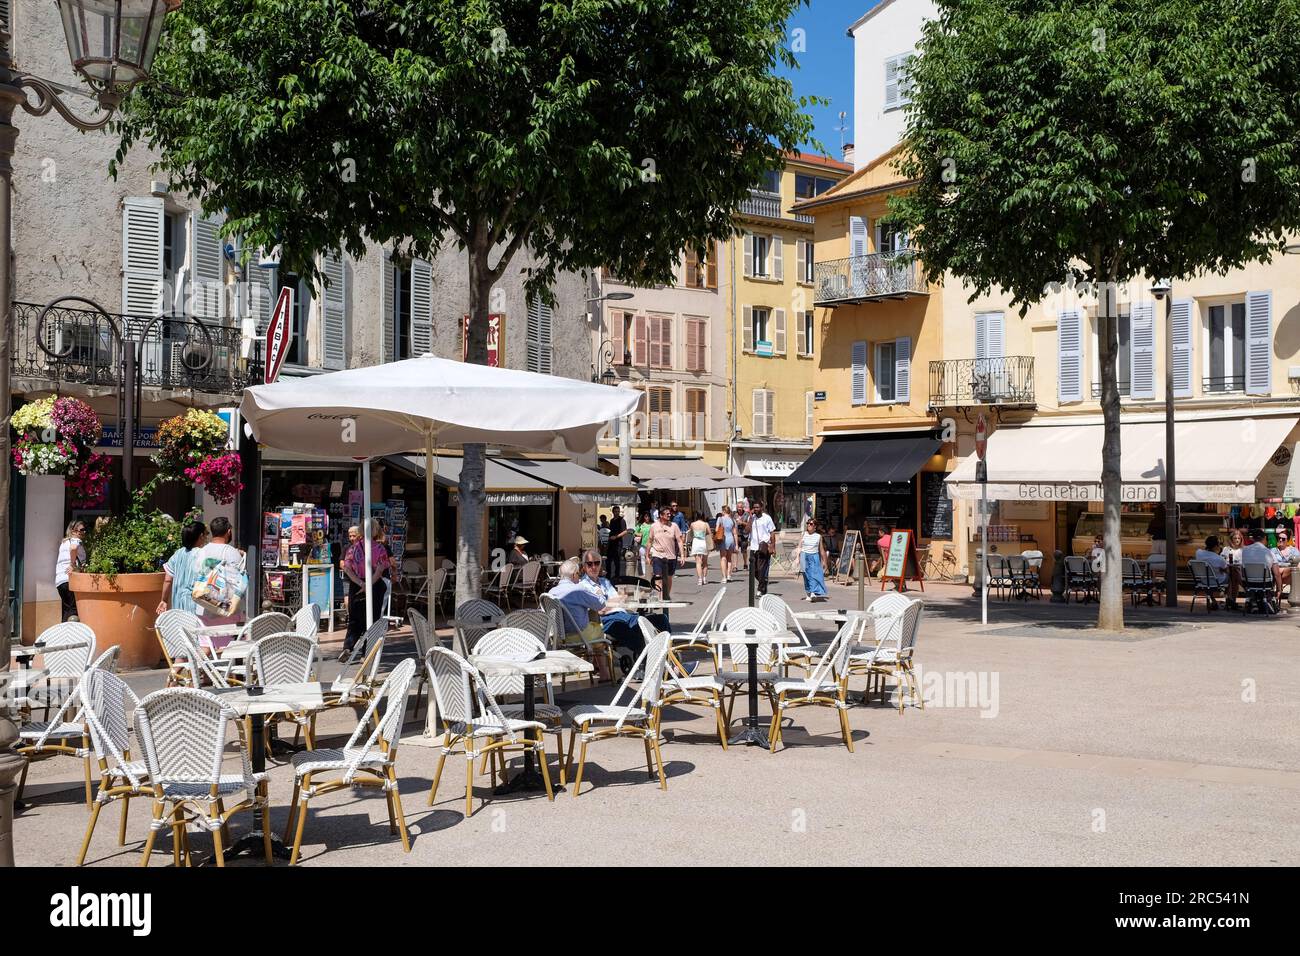 Cafes and outdoor seating in summer at Place Nationale, Antibes, Cote d'Azur, France Stock Photo